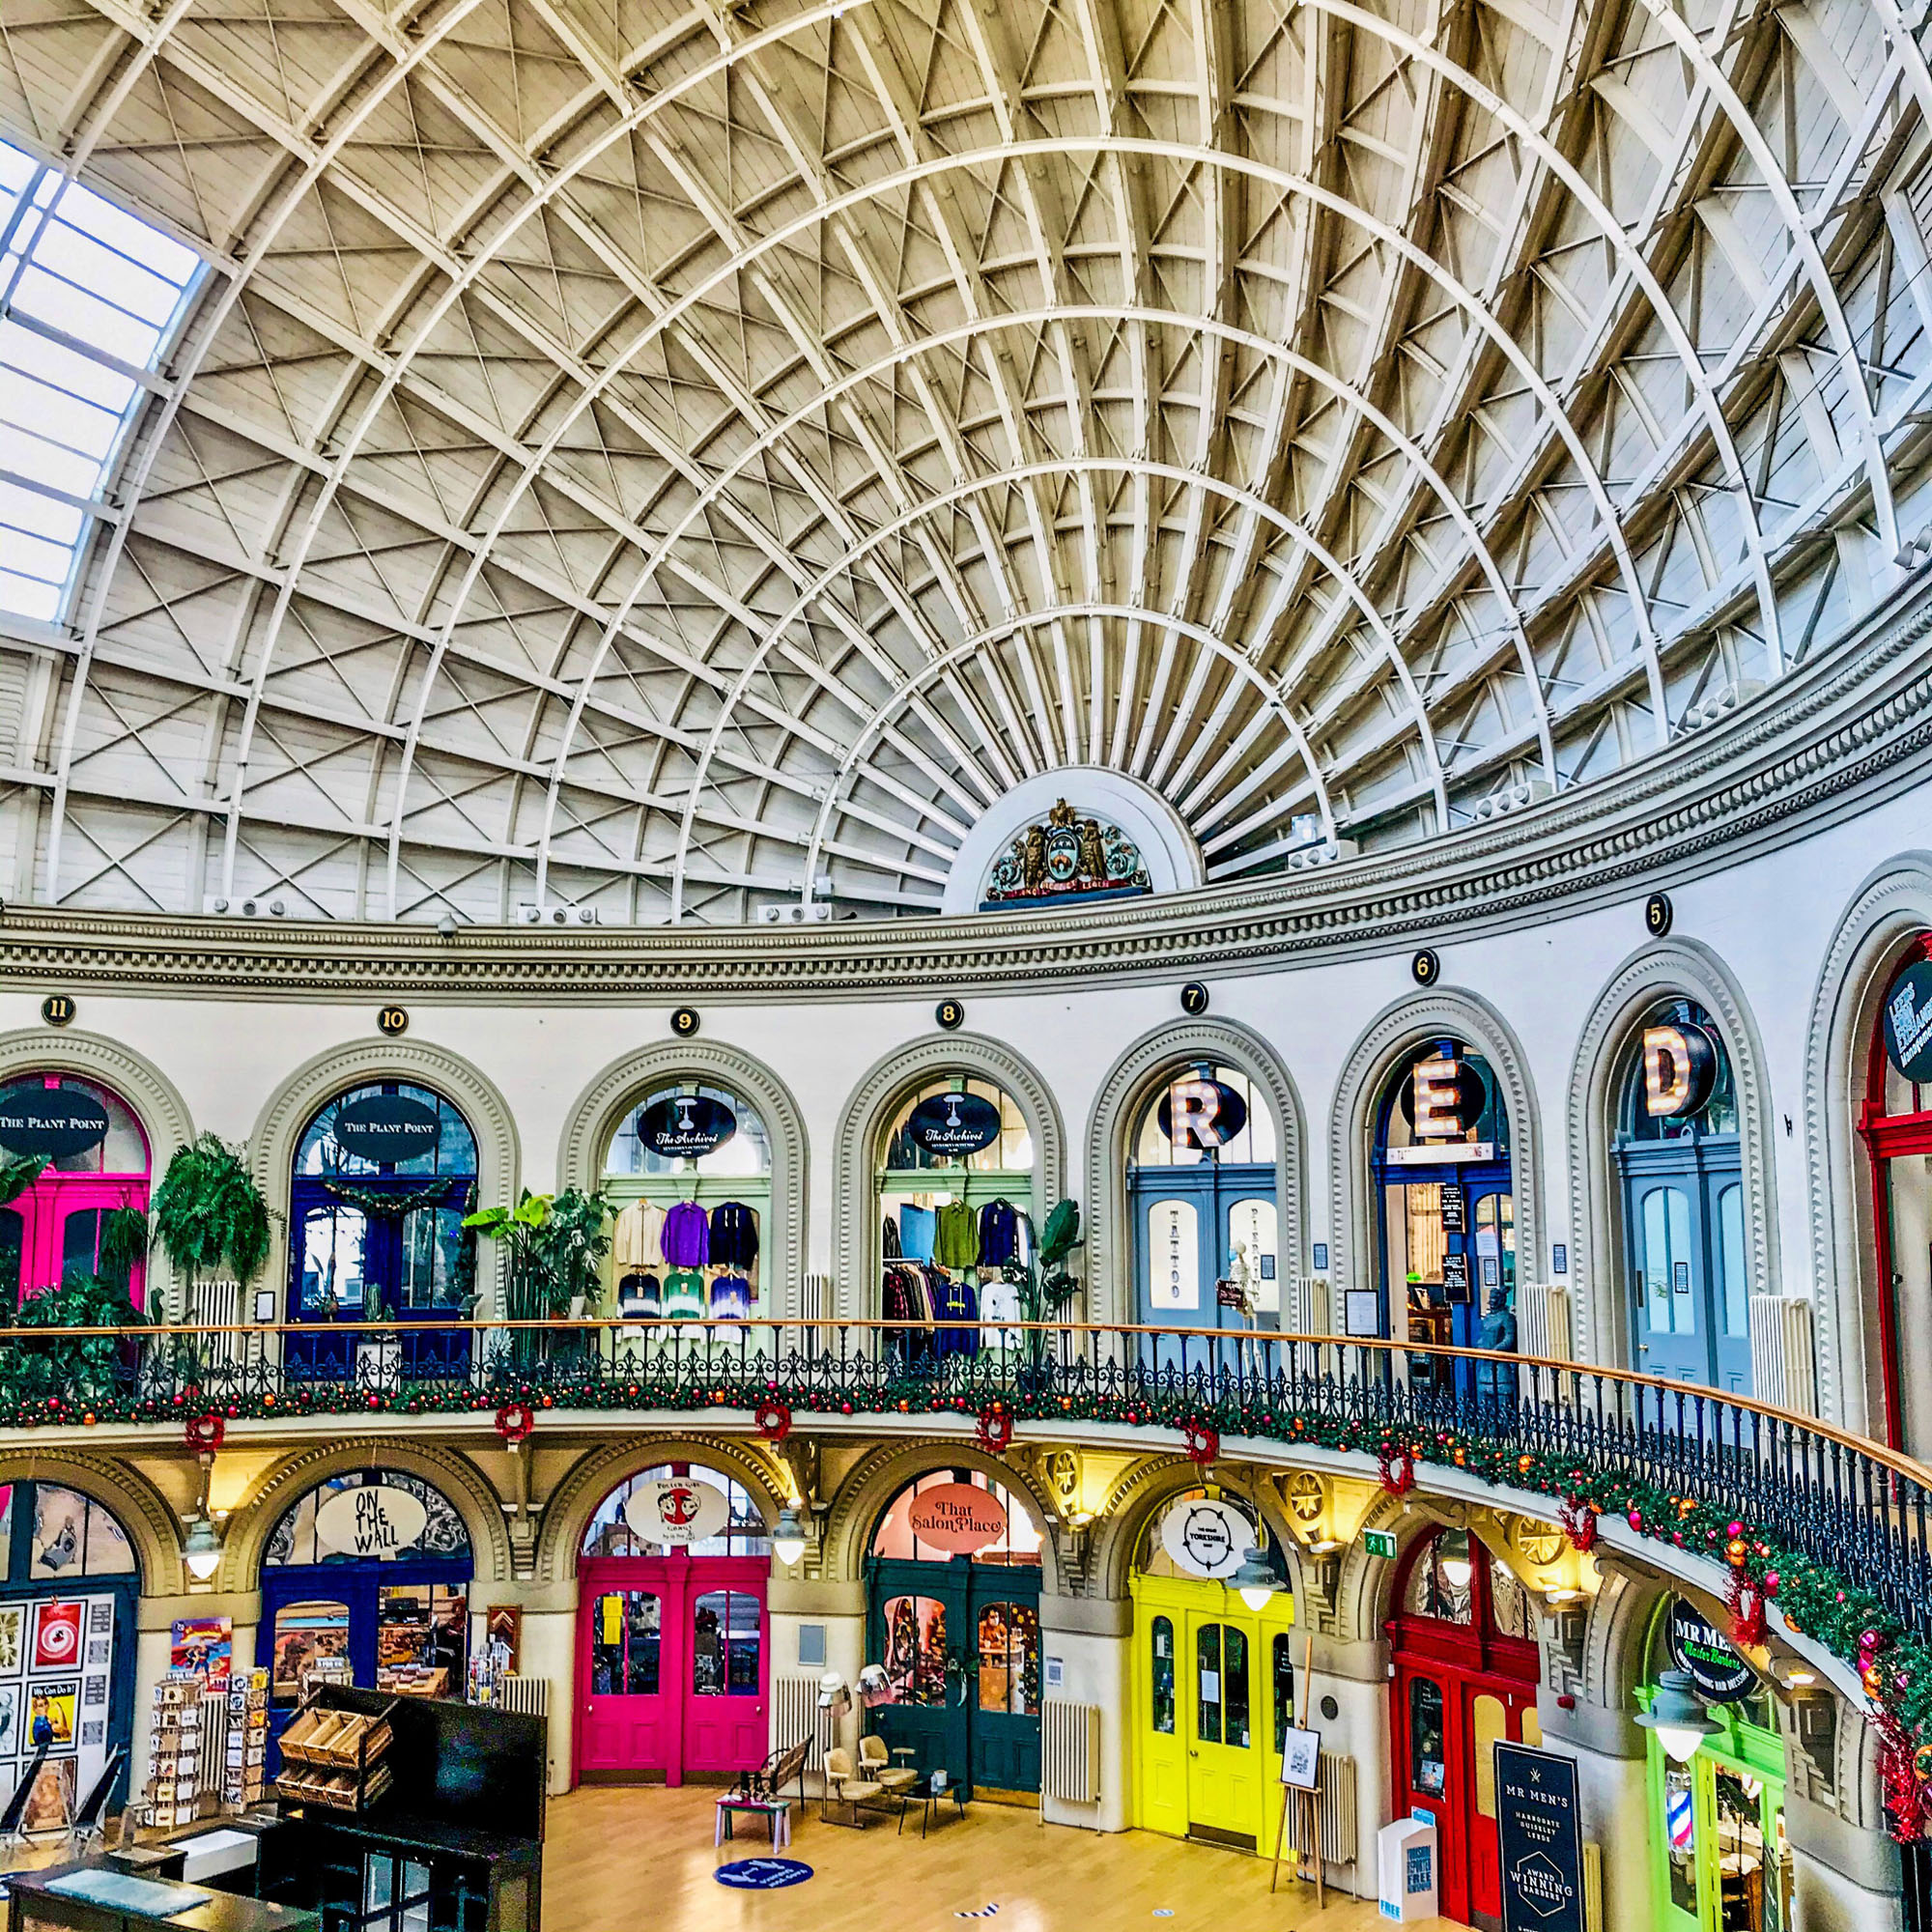 A view from the first floor balcony looking across the open space of the Corn Exchange, with brightly coloured shopfronts beneath the dome.